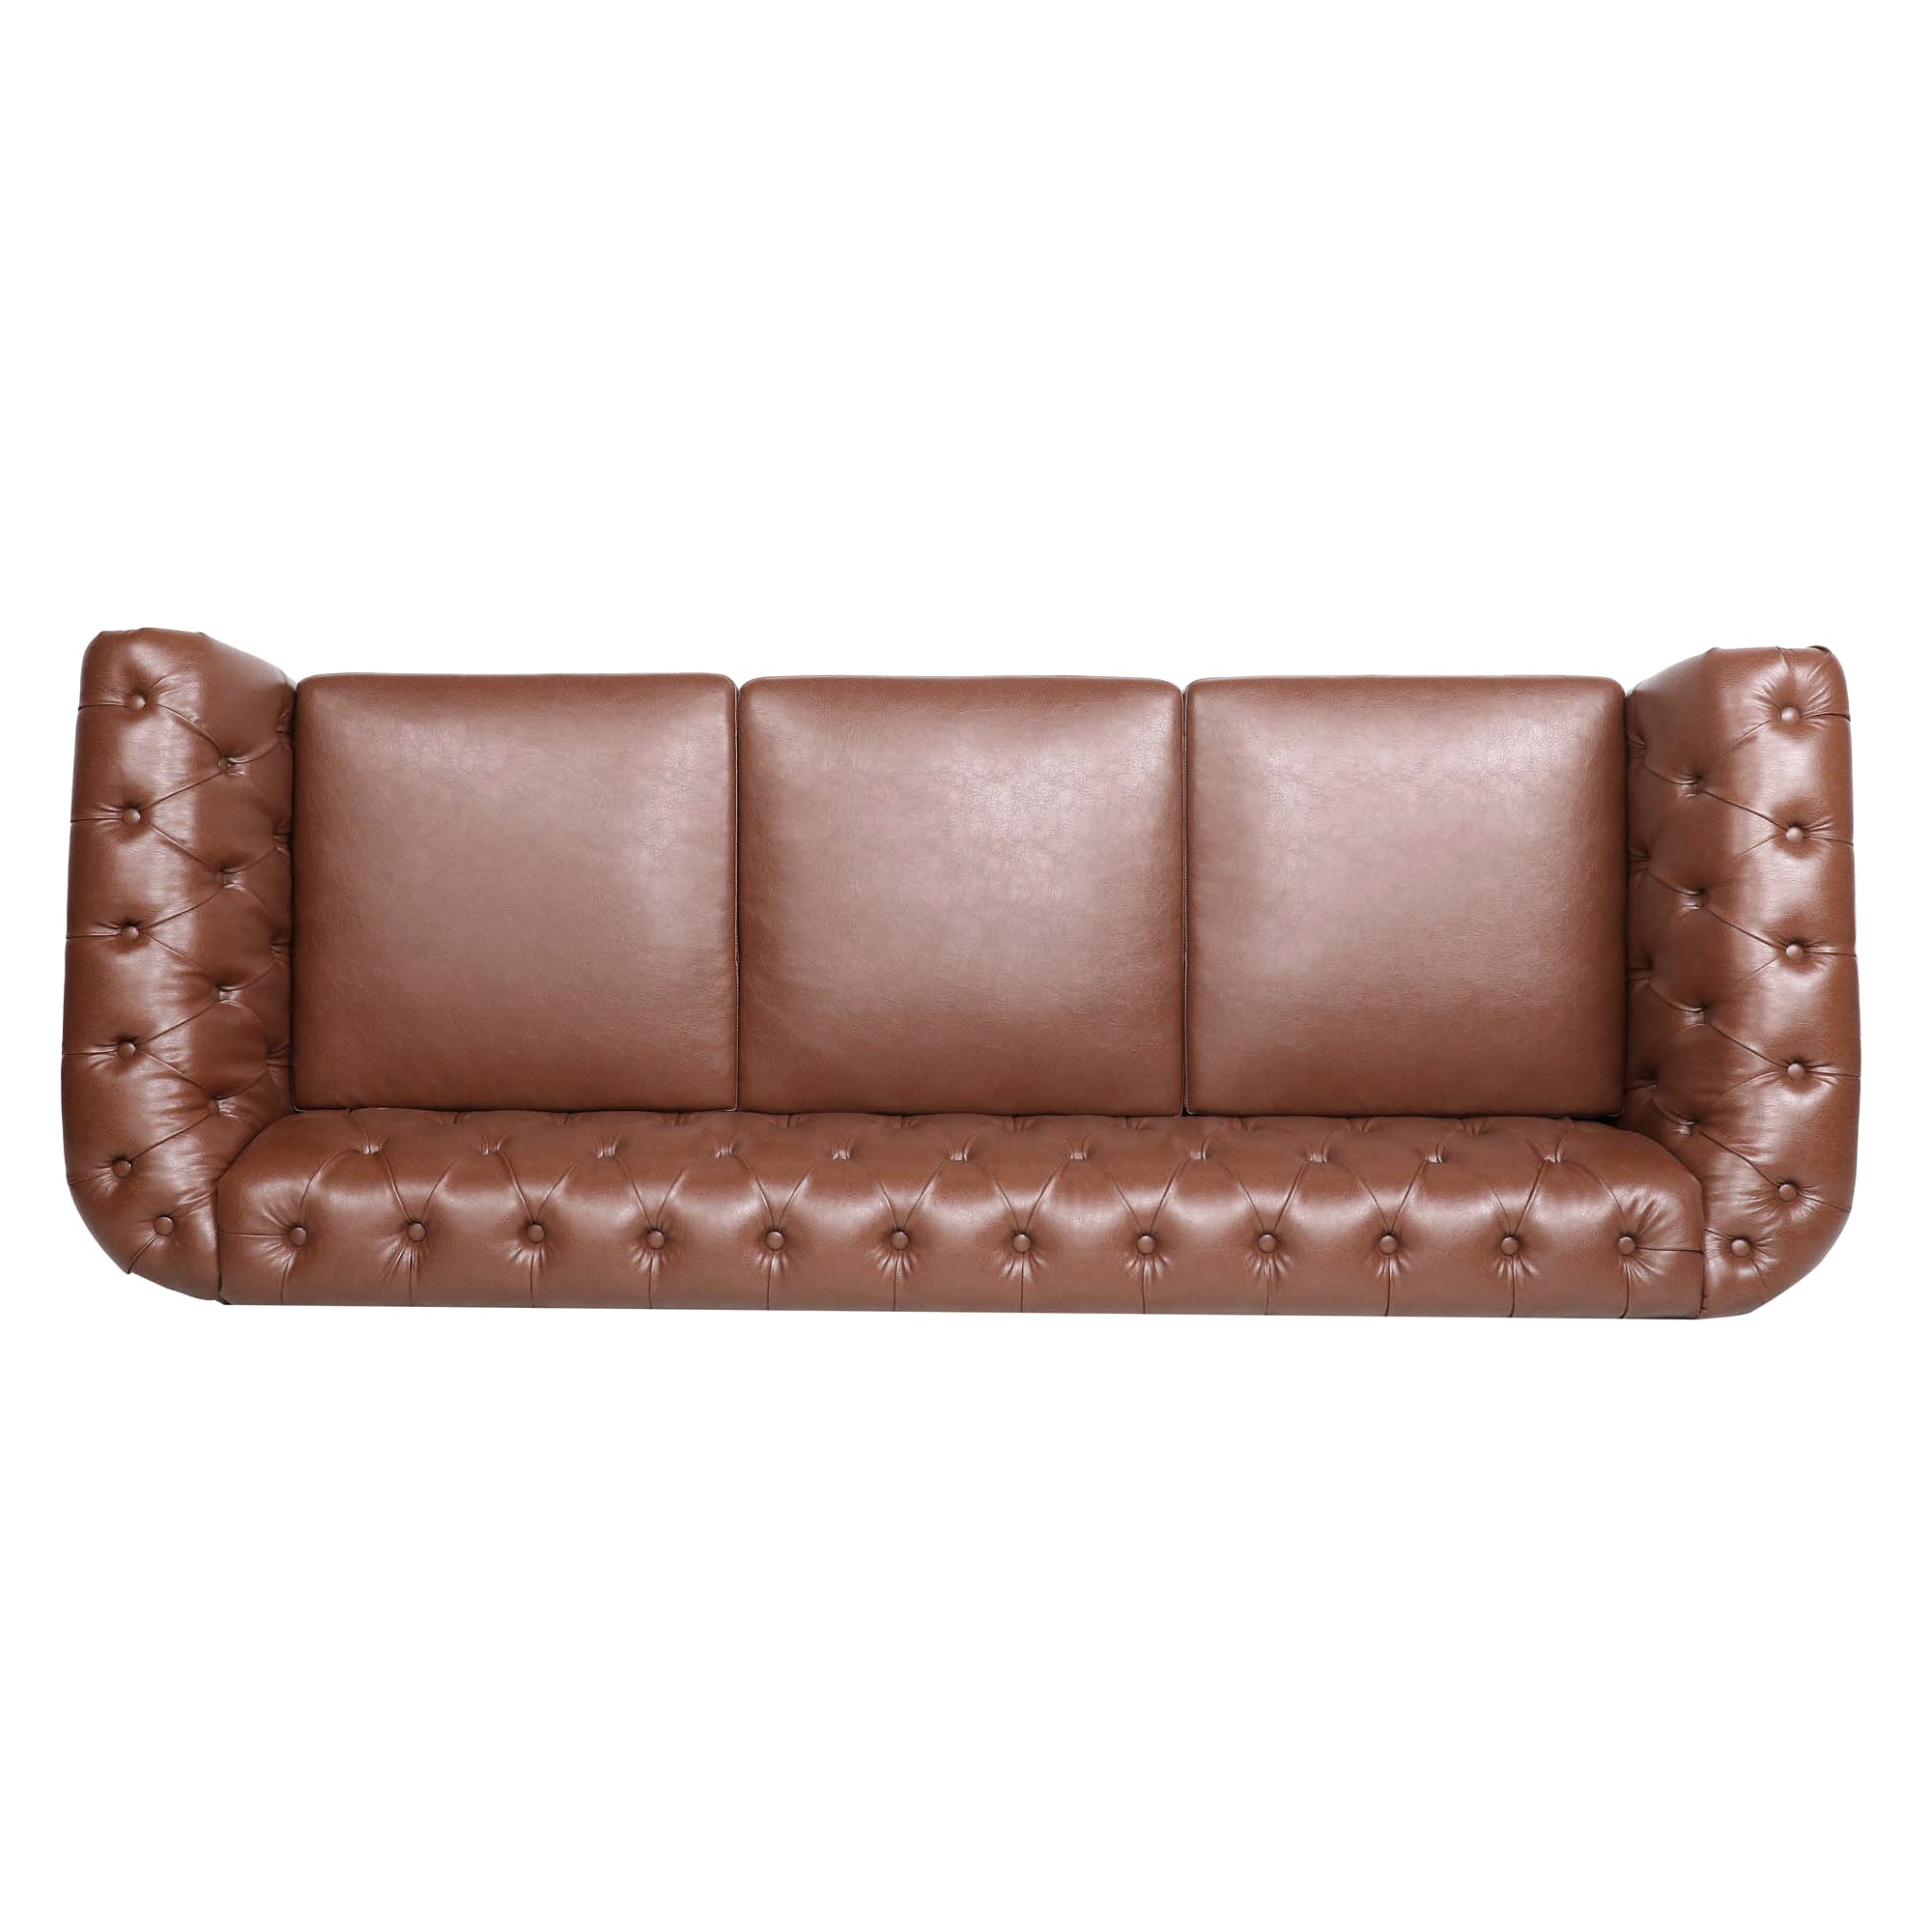 84" Cognac Faux Leather Chesterfield Sofa With Nailhead Trim